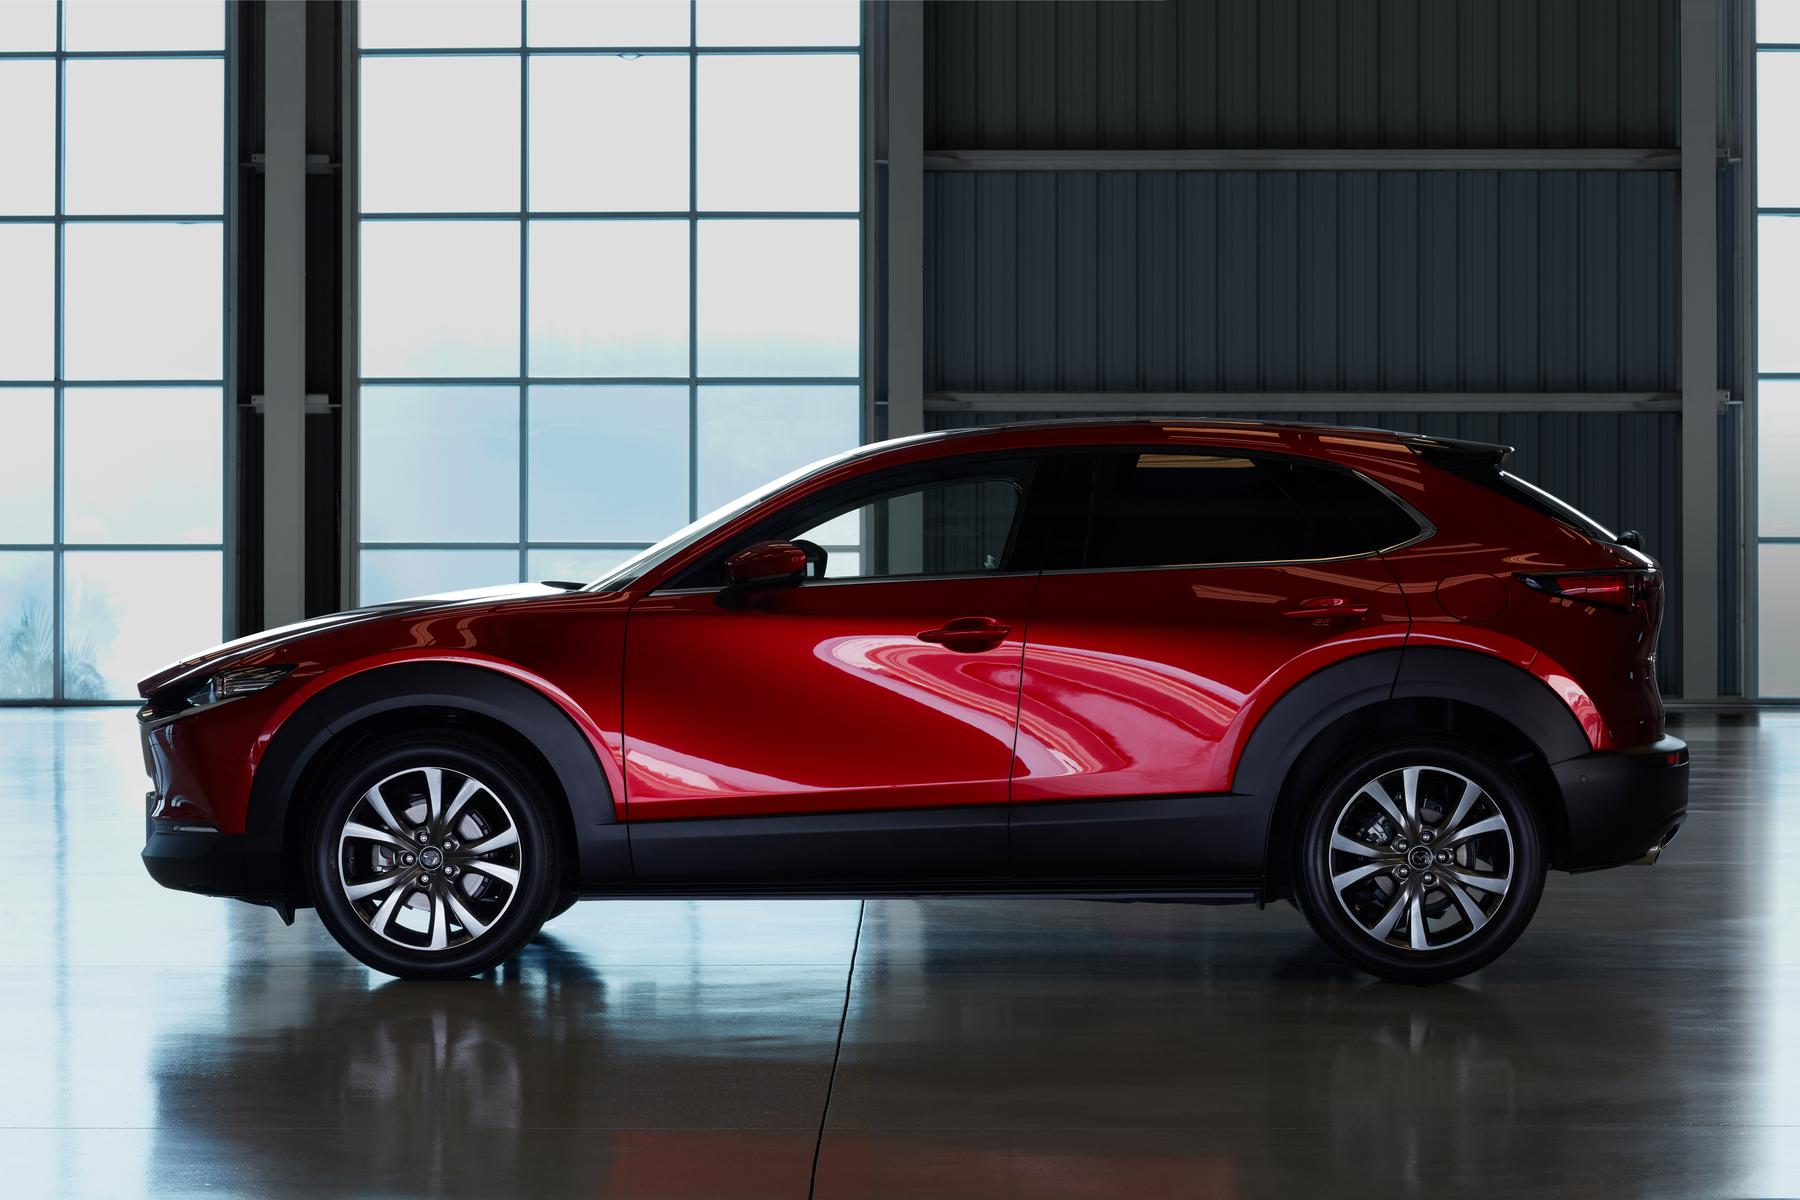 Mazda Unveils the All-New Mazda CX-30 Compact SUV in South Africa